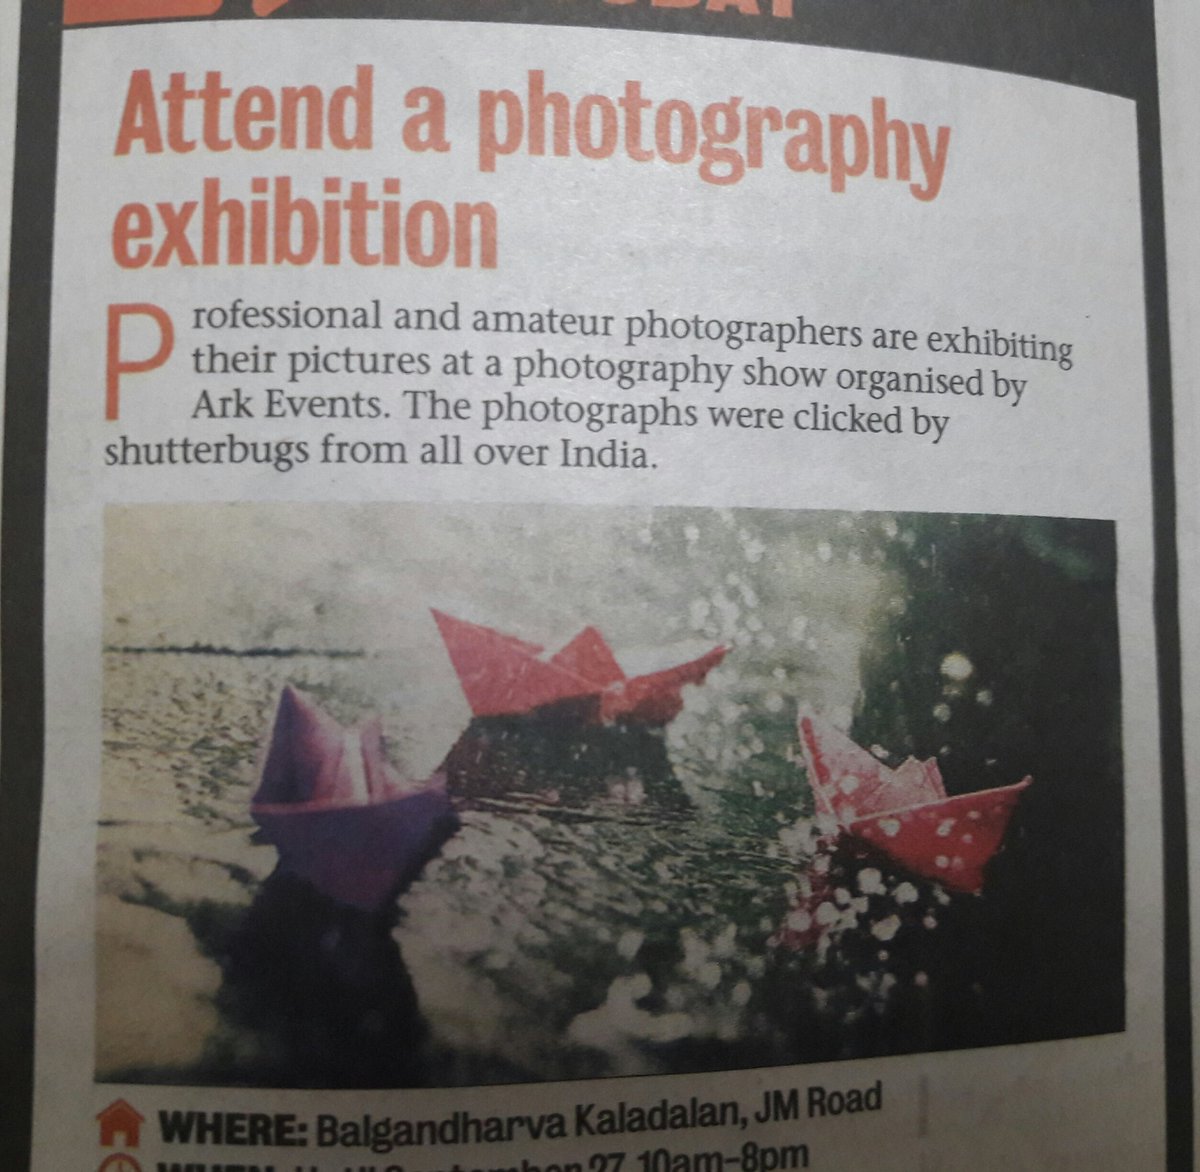 Attend a photography exhibition 
#PuneTimesMirror
#TOI